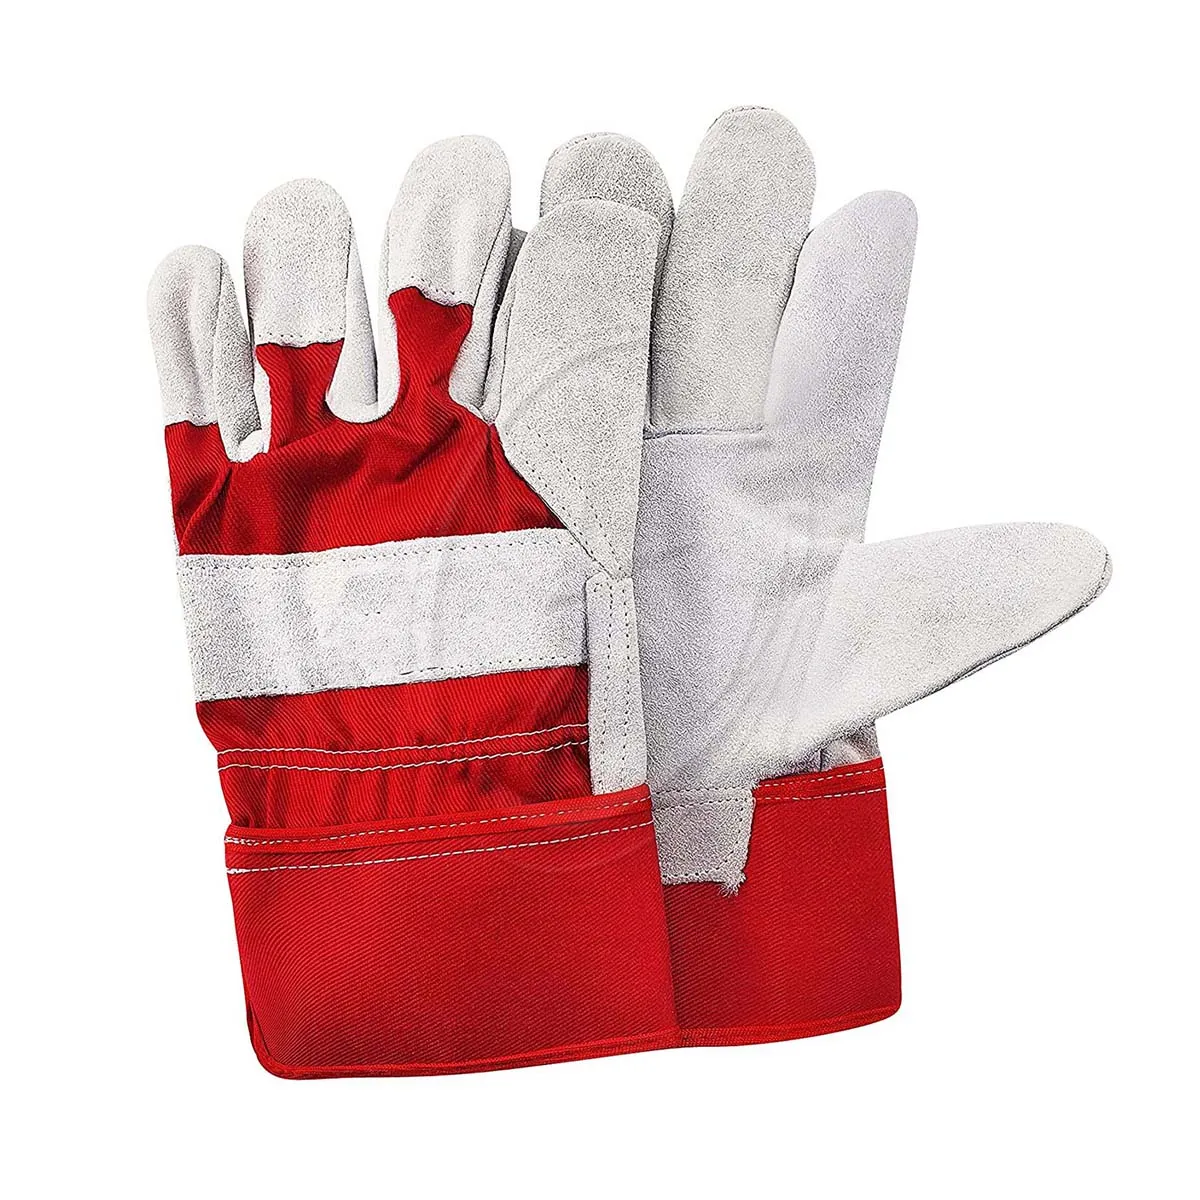 Canadian Rigger Gloves New style hot sale Cow split leather safety welding construction with competitive price rigger gloves